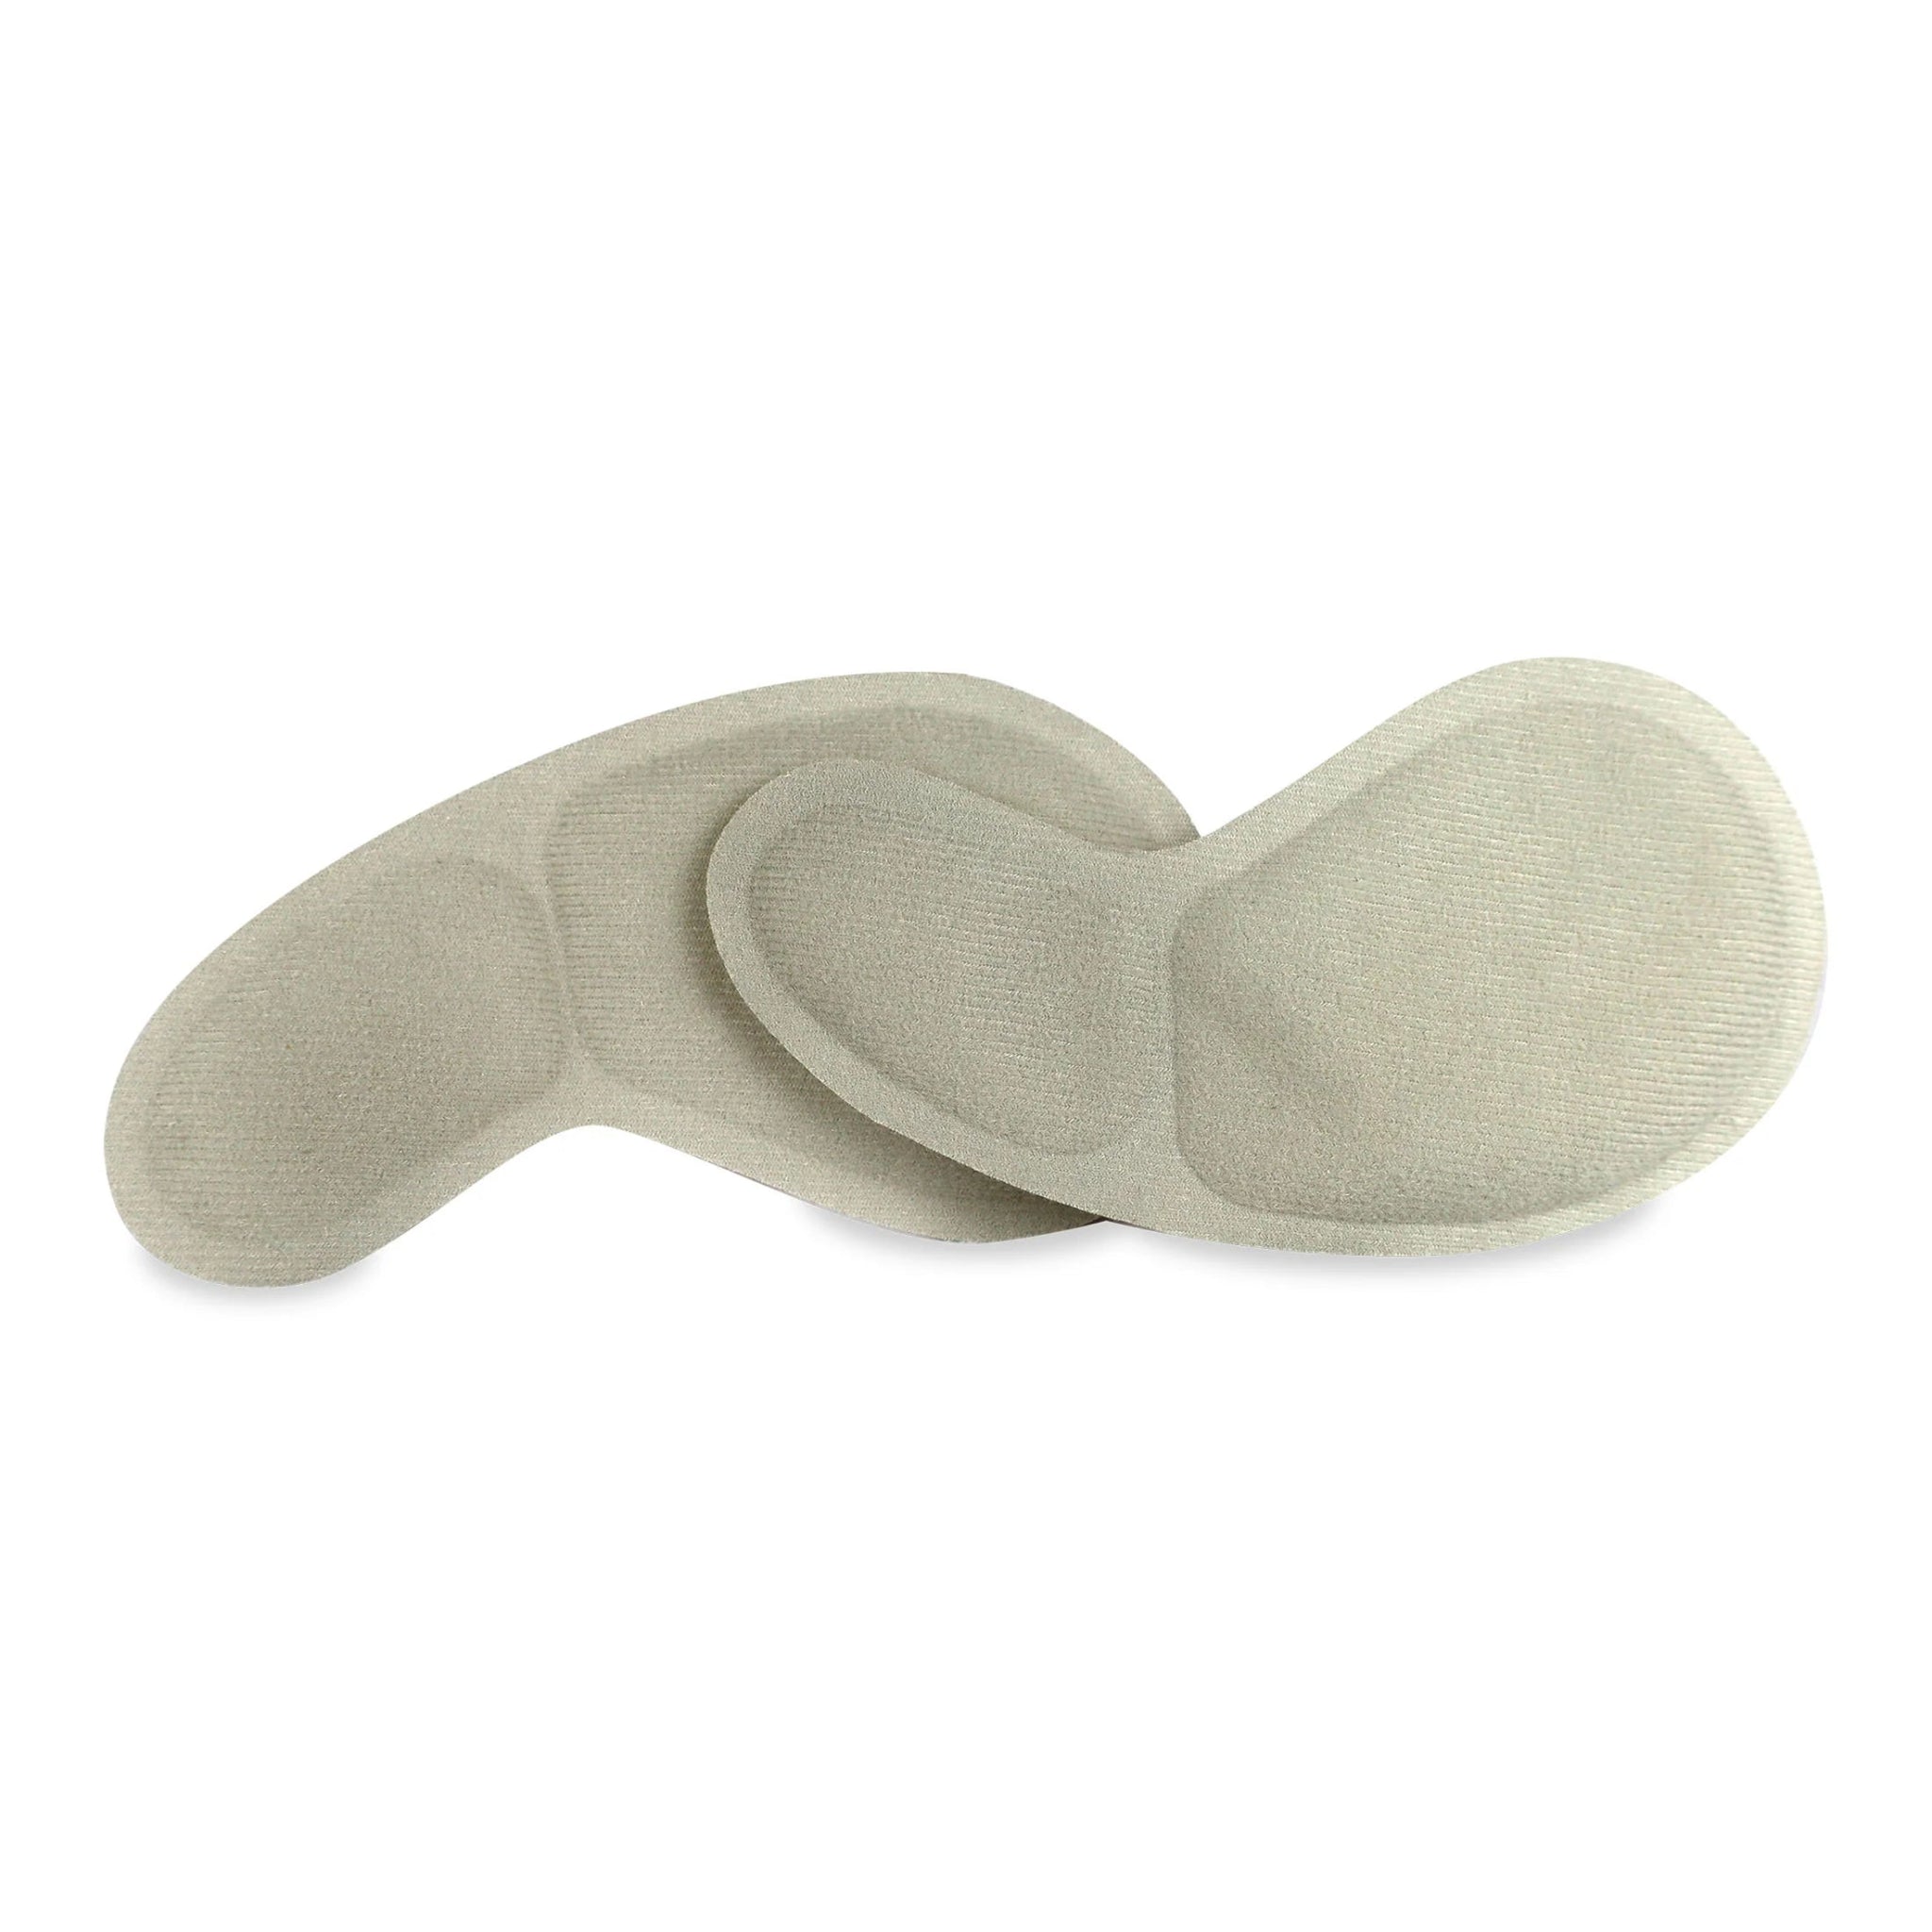 Joylux coldHER™ Cooling Bra Inserts for rapid relief from hot flashes and breast discomfort